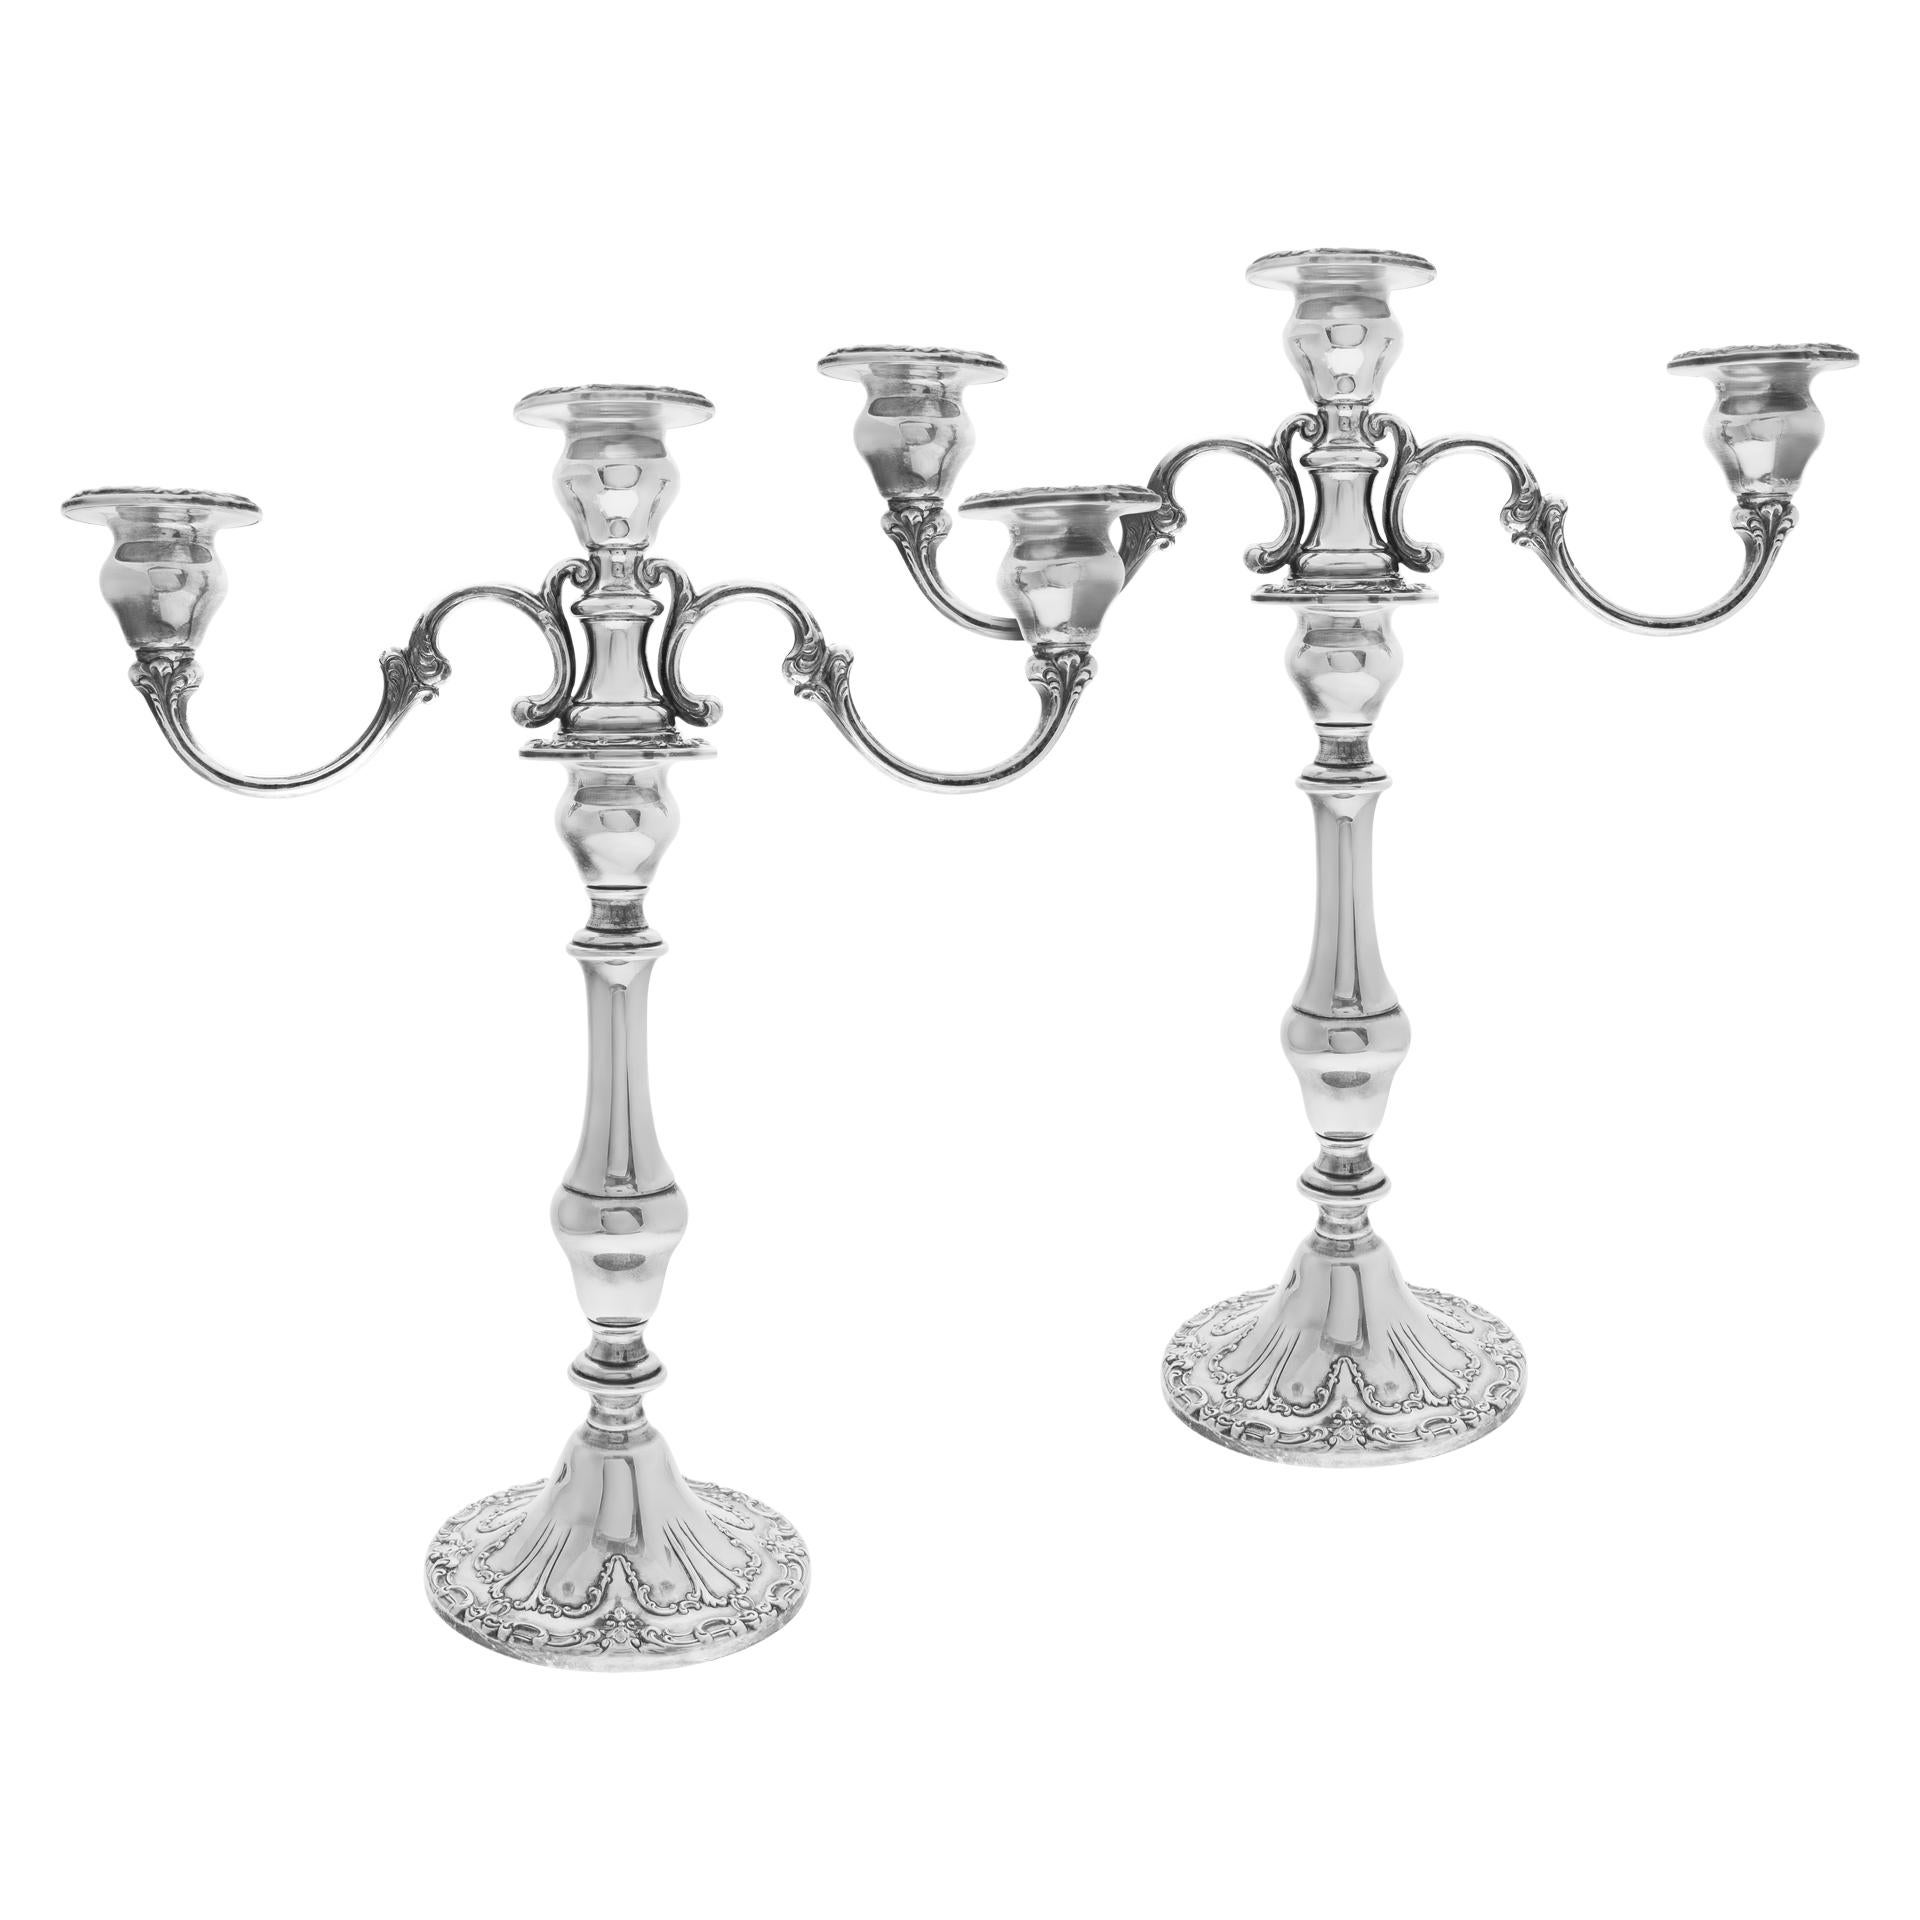 Pair of sterling silver 3 tiers candelabra by Gorham. Heigth: 13 inches. Width: 12